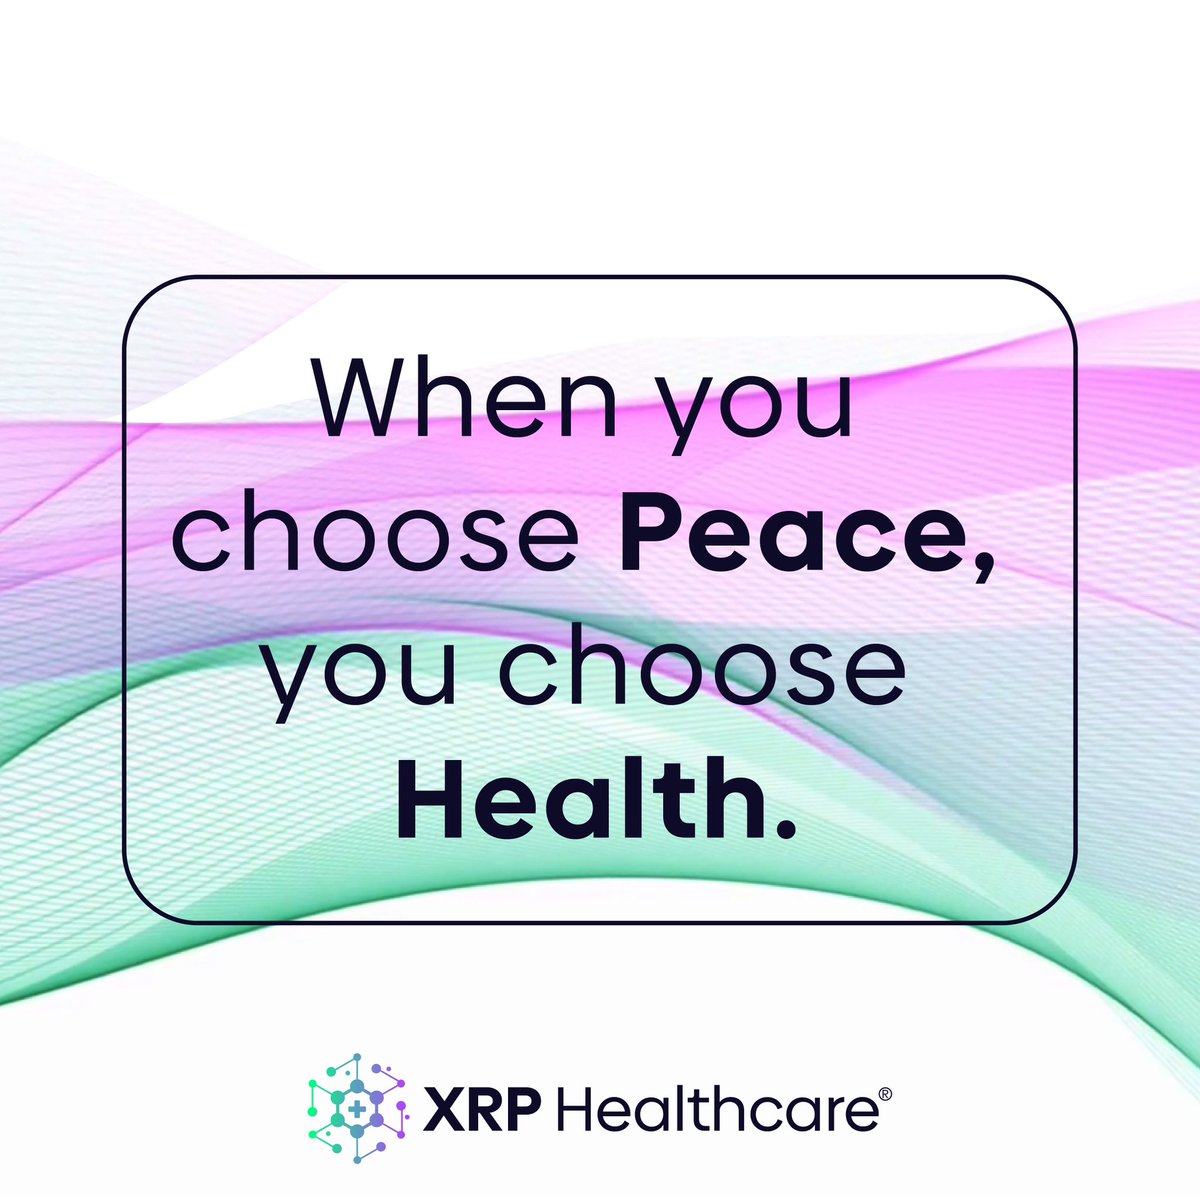 When you choose Peace, you choose Health⚕️

#XRPH #XRPHealthcare